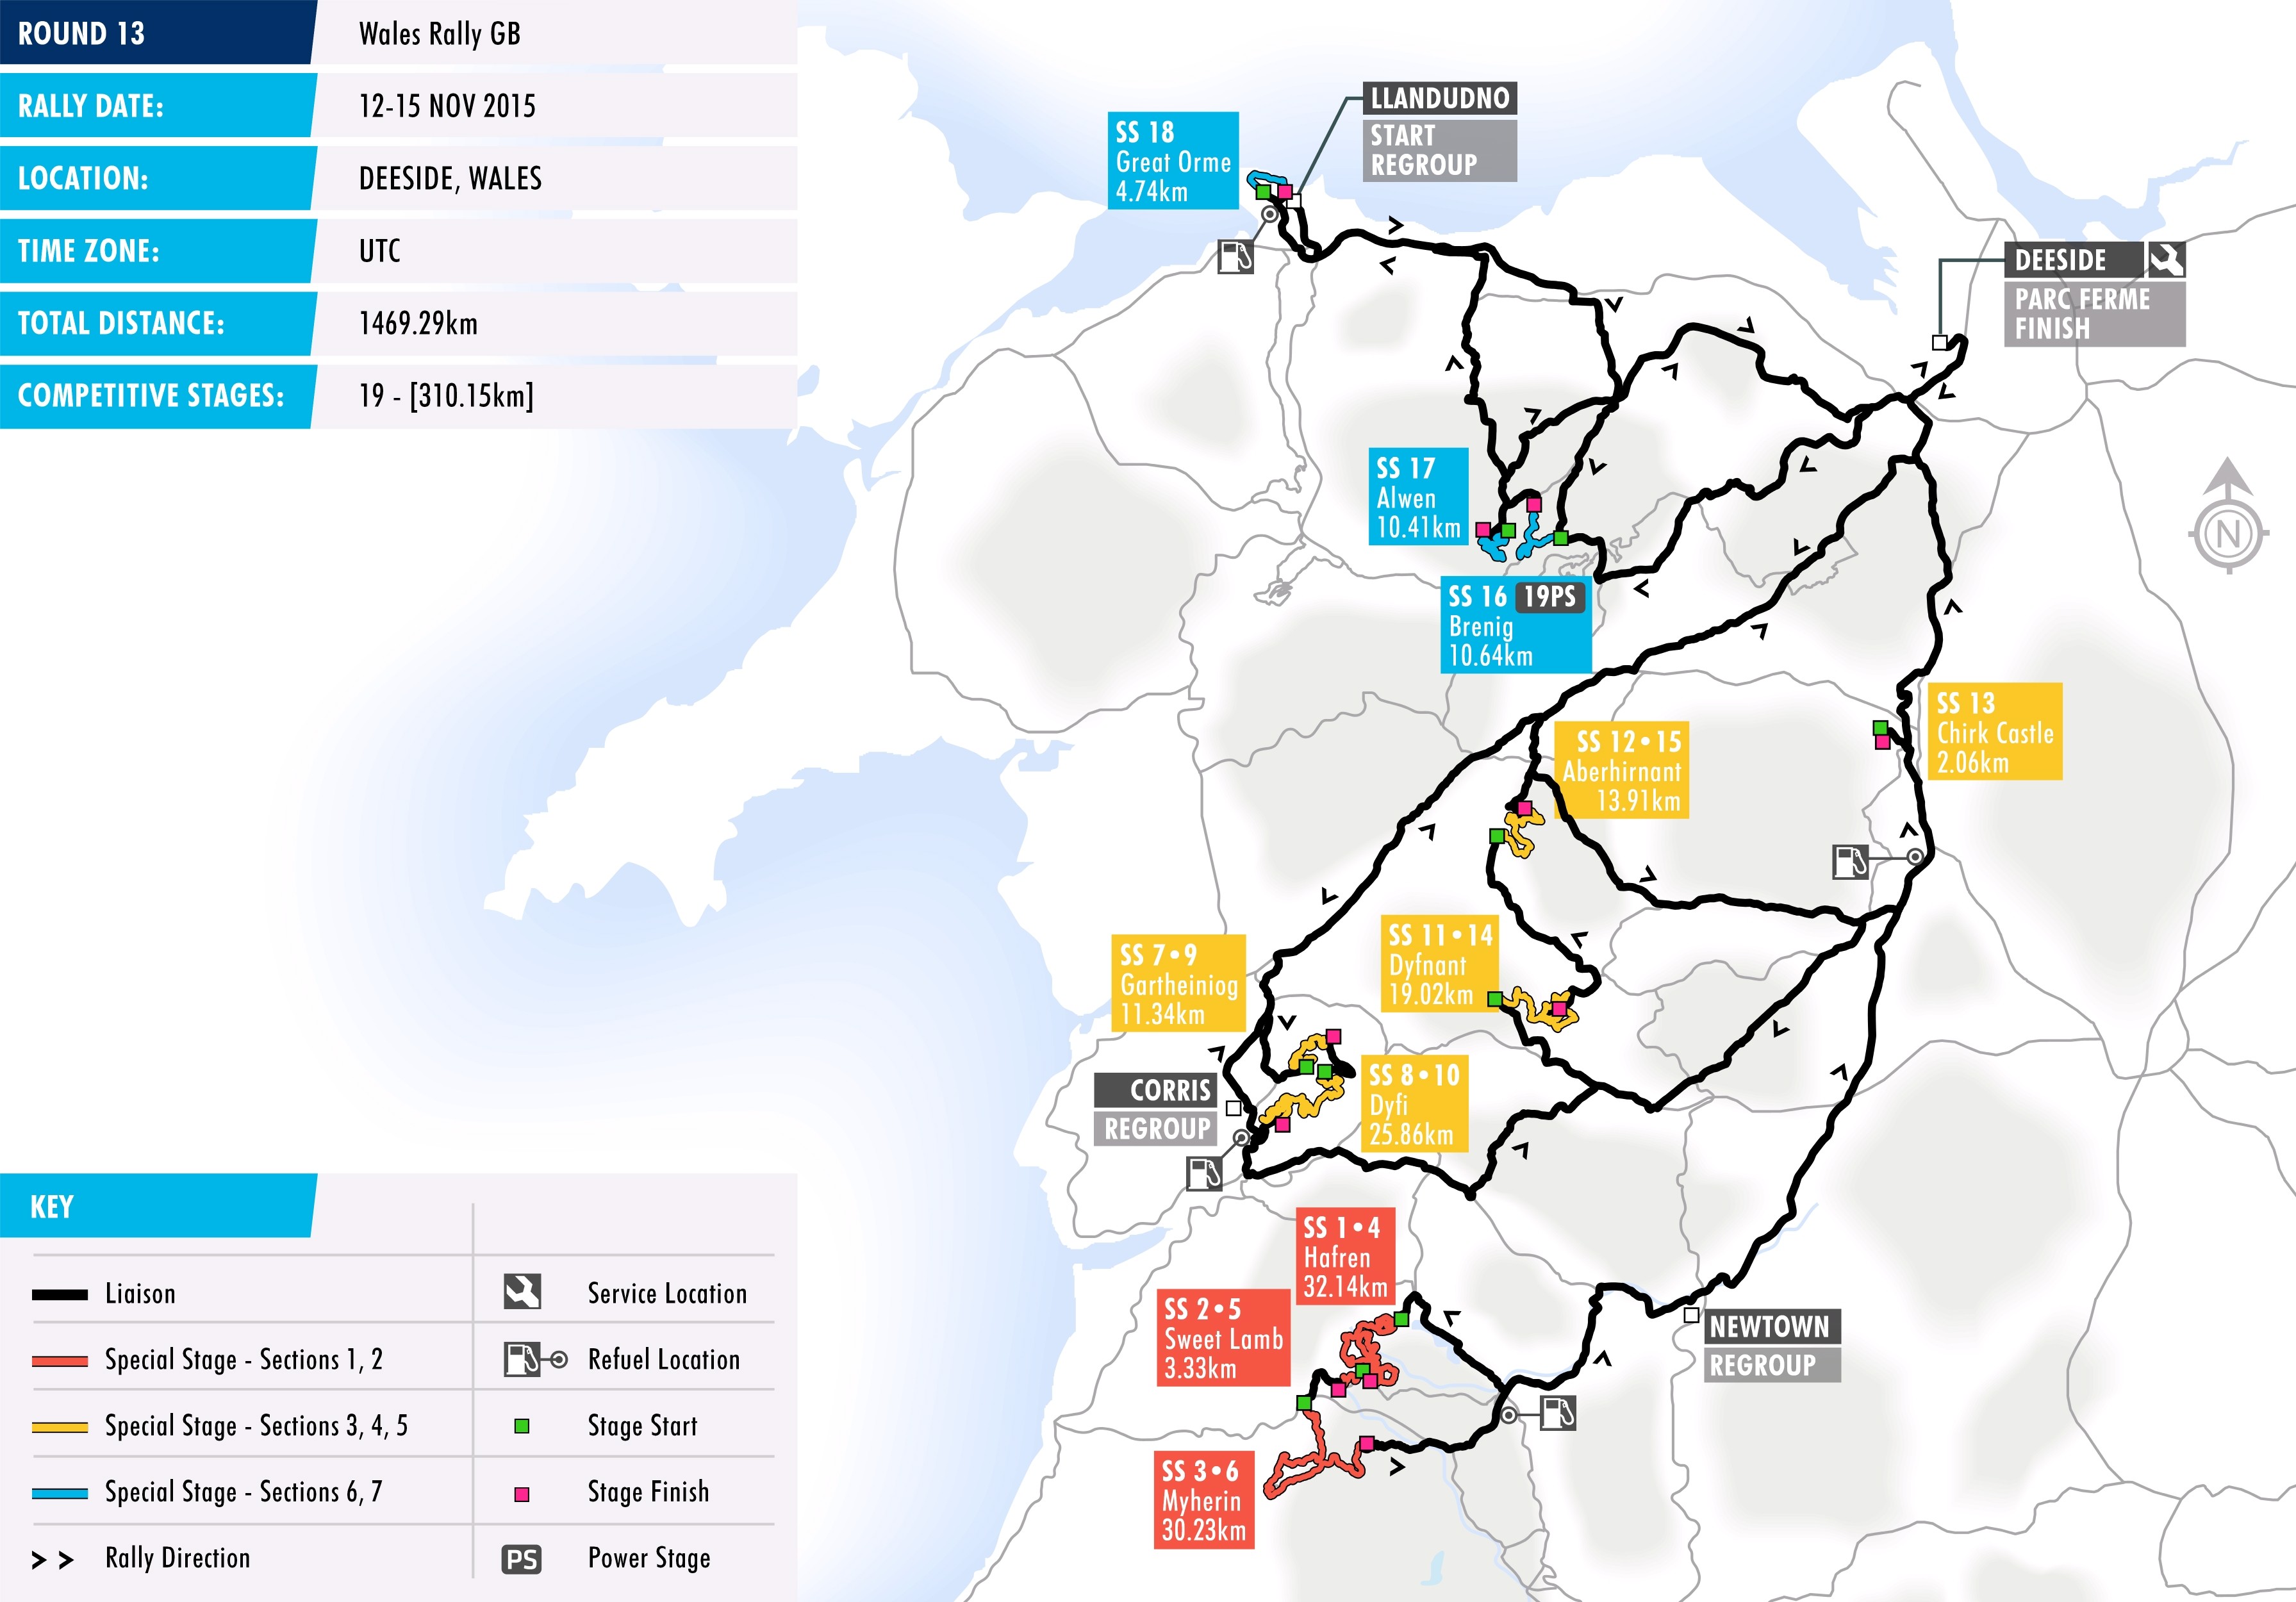 2015 Wales Rally GB - Stage Map